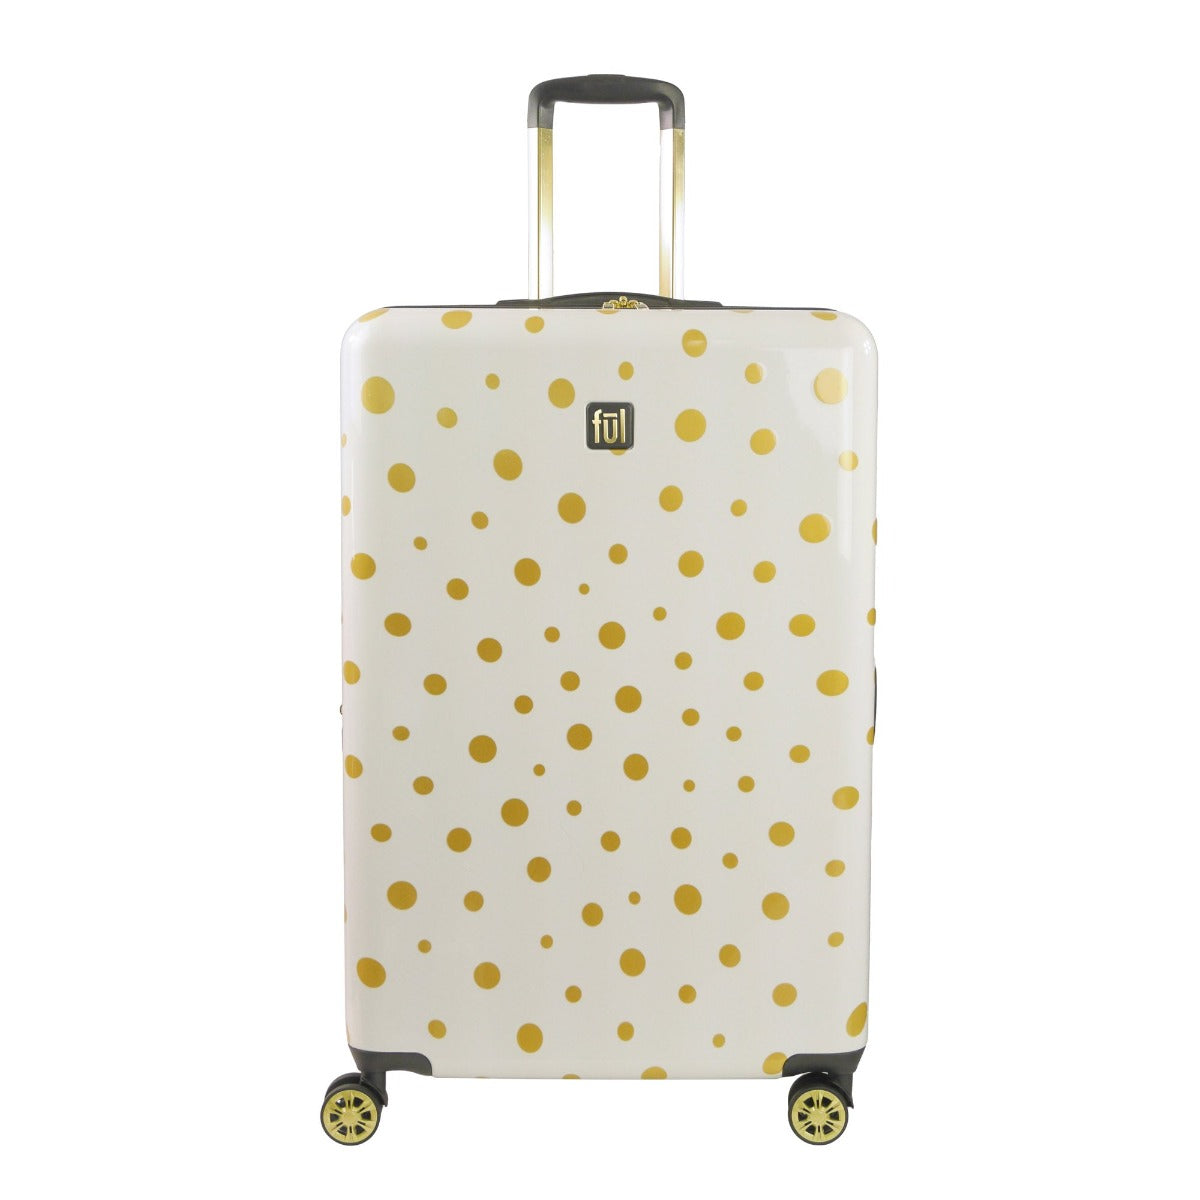 Ful Impulse Mixed Dots Hardside Spinner 31" Checked Luggage White Gold Suitcase